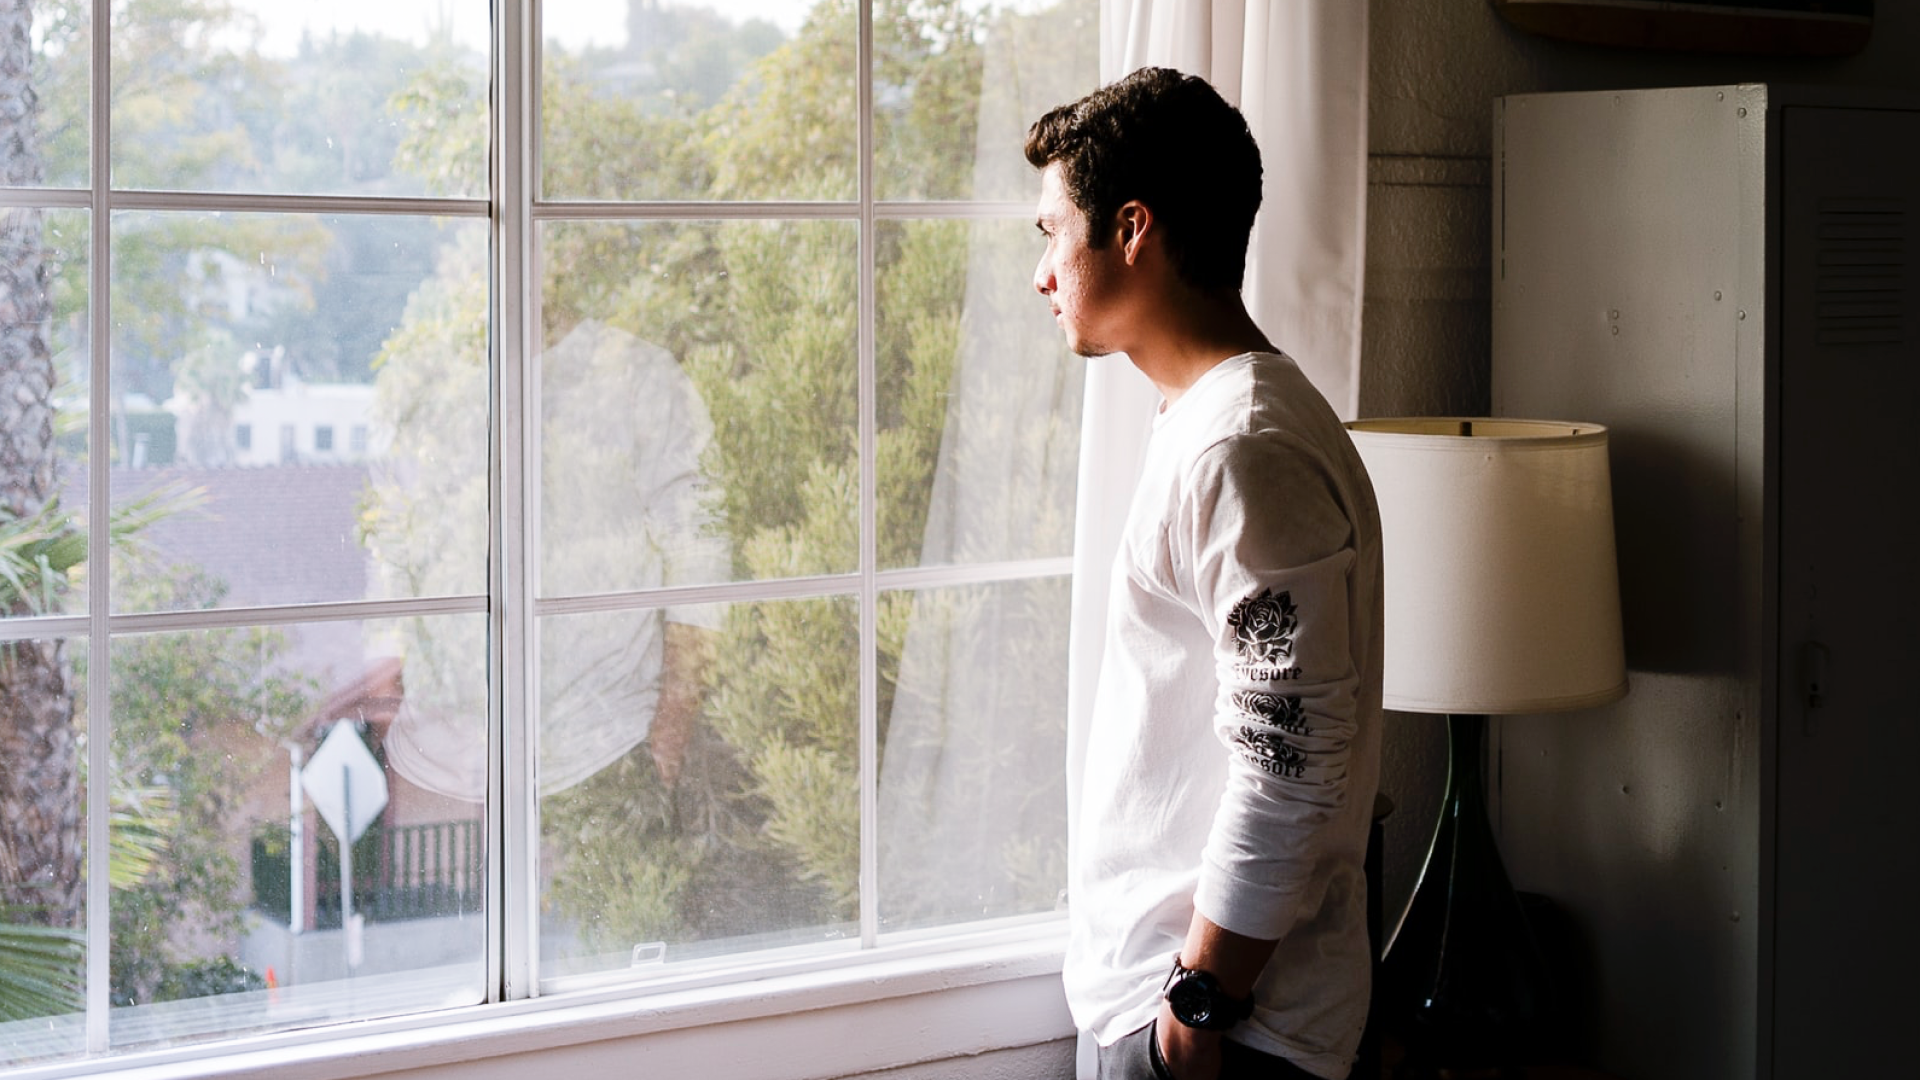 A young person looks out the window at a tranquil, verdant street, moving their focus back to the present moment during the grieving process.